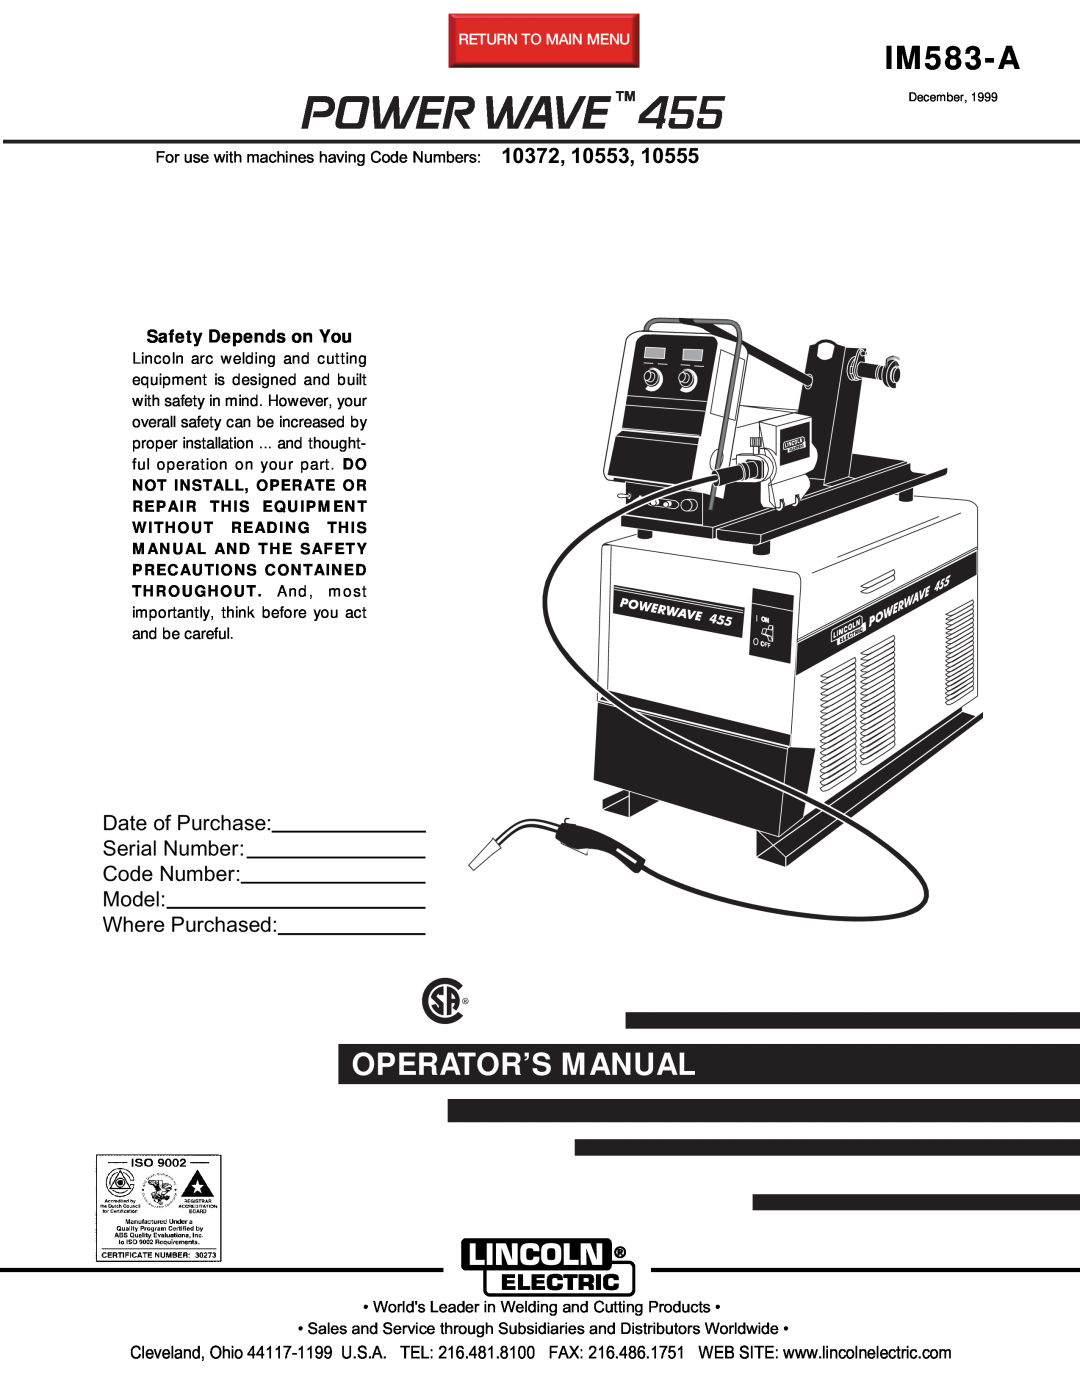 Lincoln Electric IM583-A manual Date of Purchase Serial Number Code Number Model Where Purchased, Power Wave 